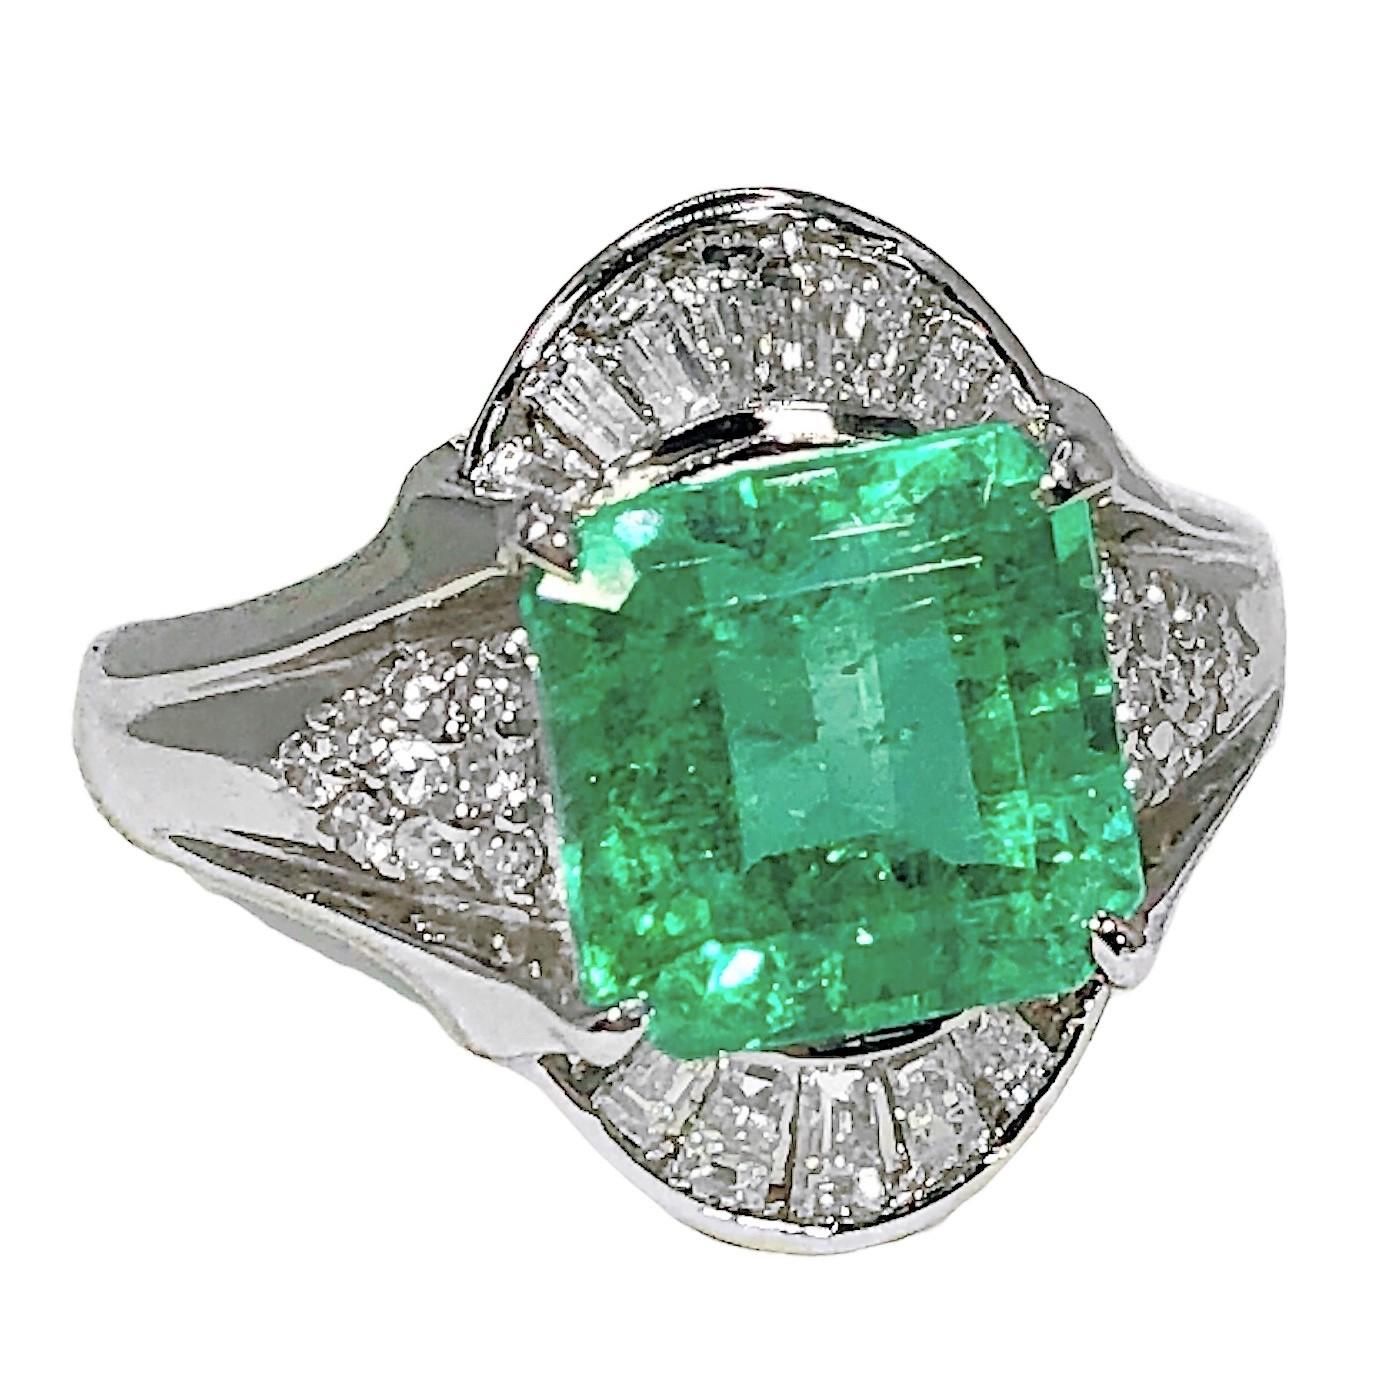 This delicate platinum cocktail ring has, as it's principle feature a lovely and brilliant, square emerald cut natural emerald weighing exactly 3.48ct. Surrounding the center stone are assorted tapered baguette and brilliant cut diamonds with a